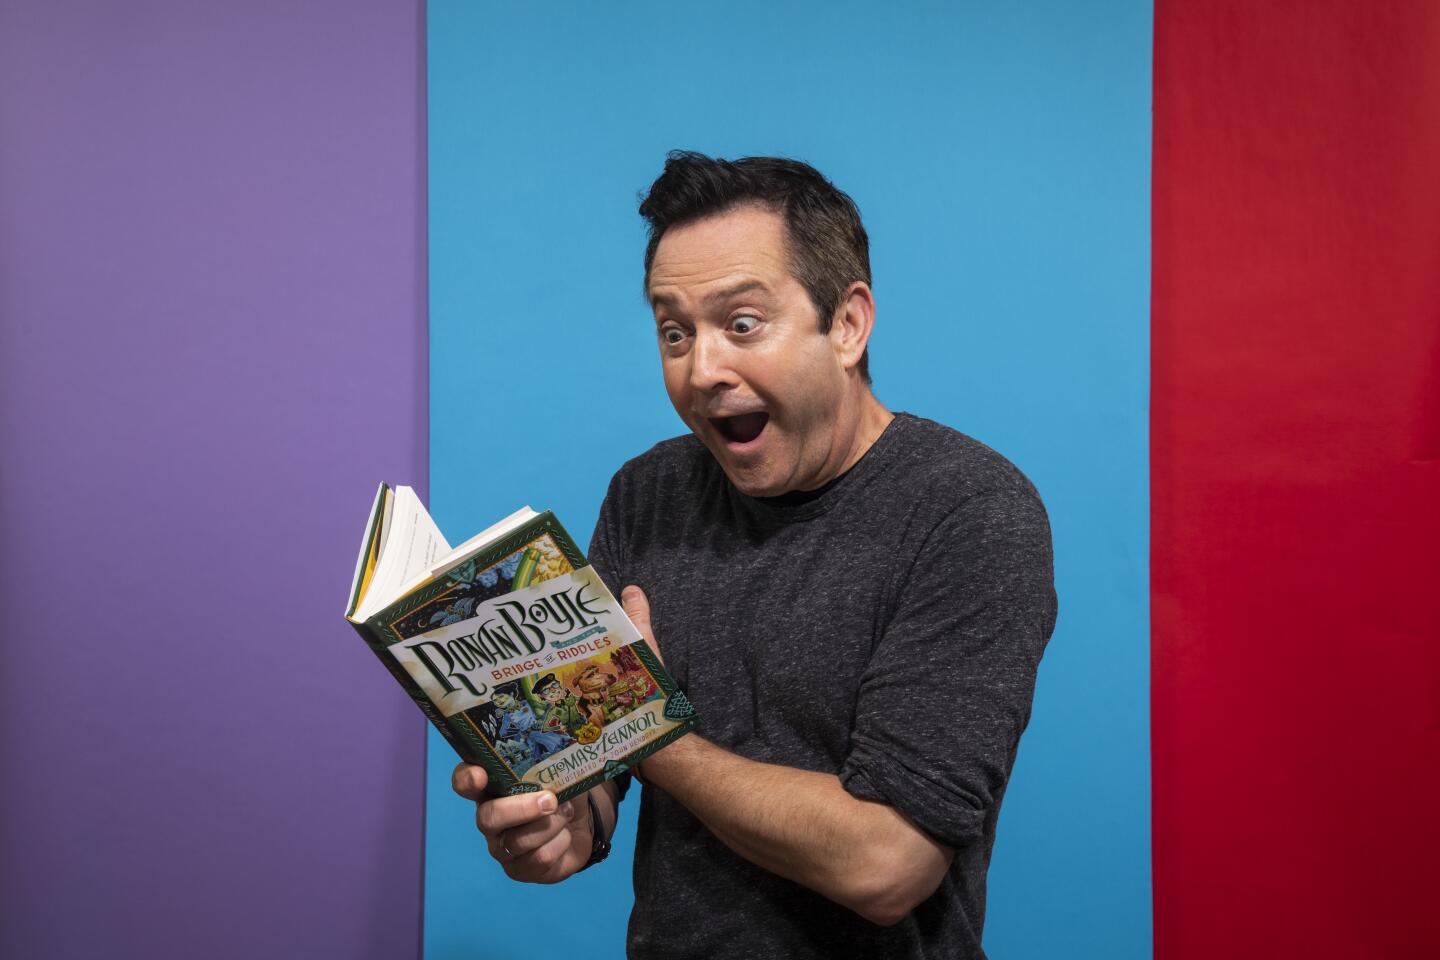 Thomas Lennon, author of the Ronan Boyle books, at the L.A. Times Photo and Video Studio.